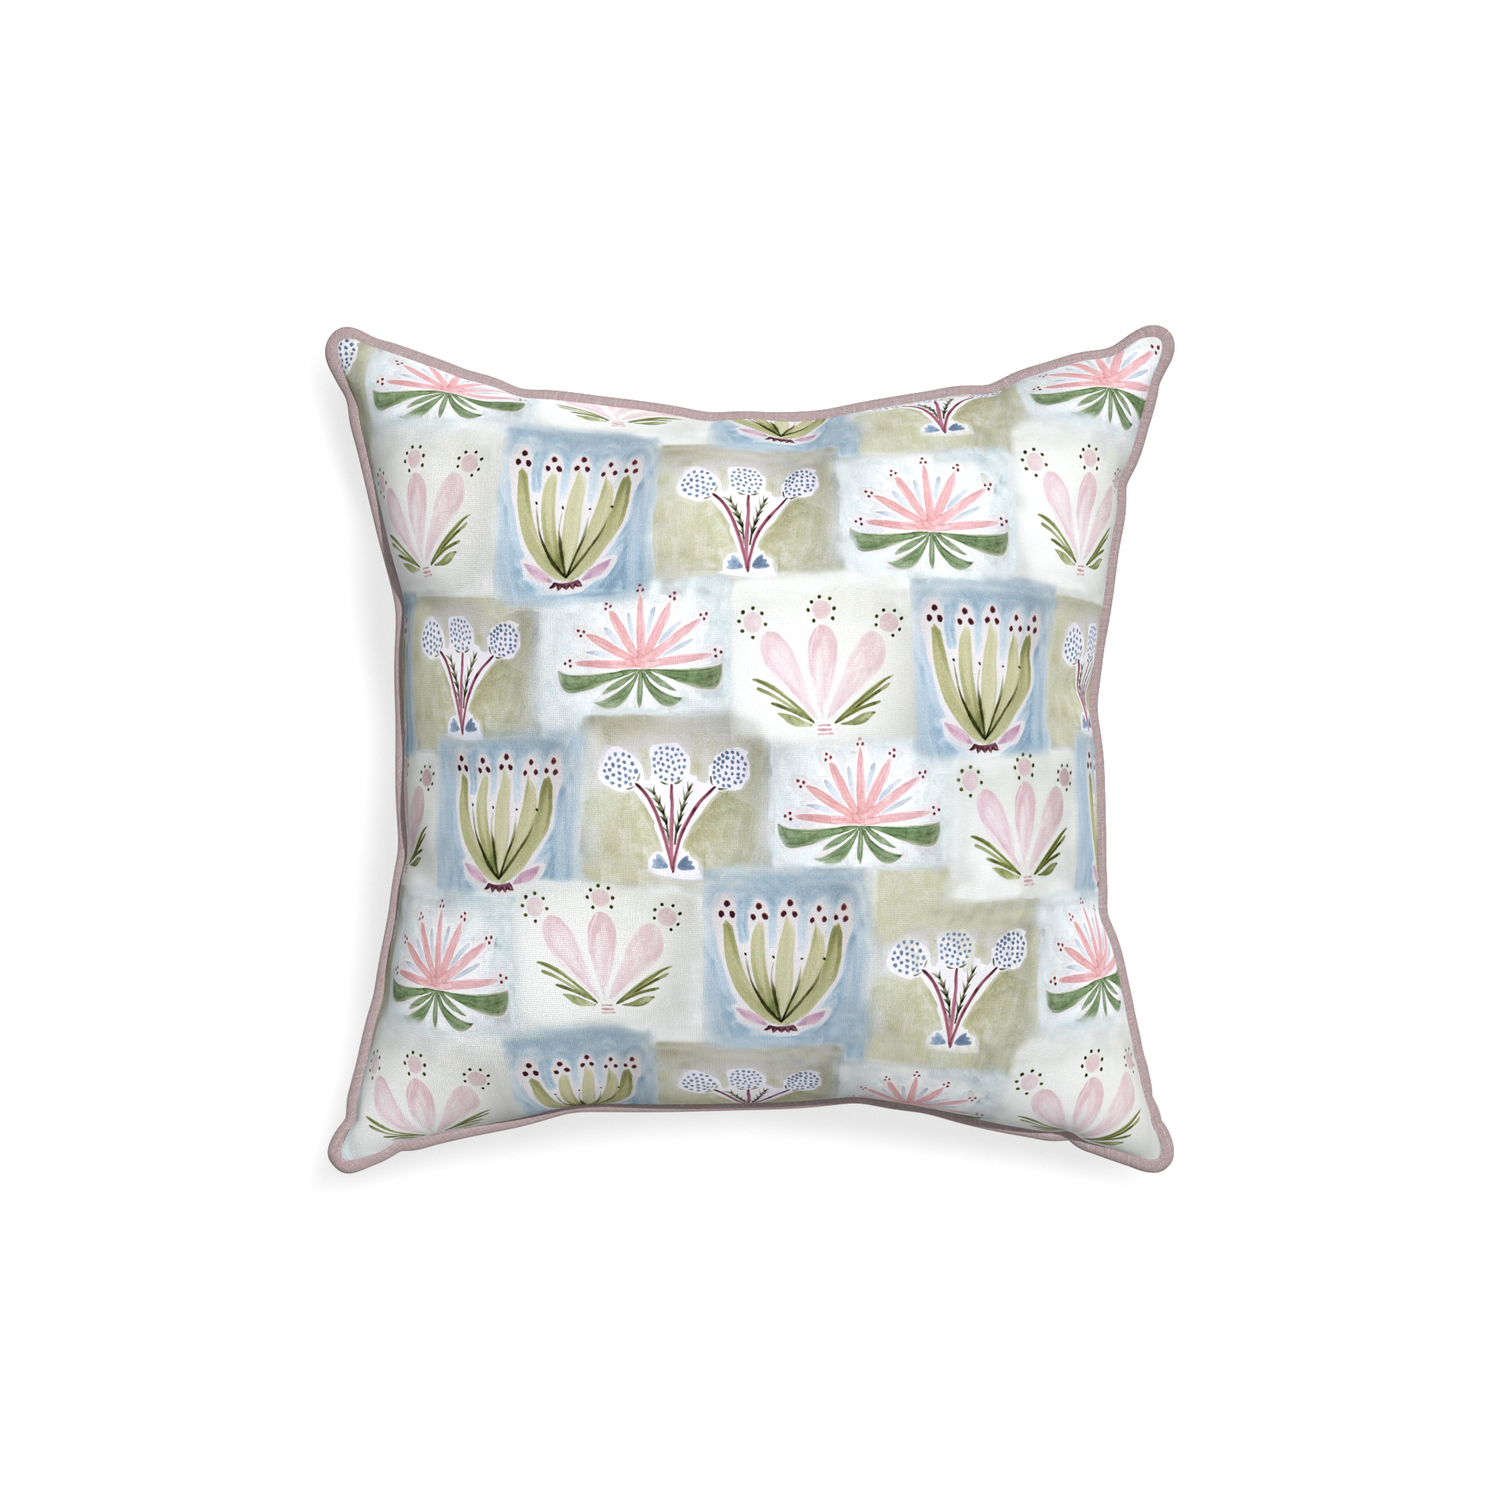 18-square harper custom hand-painted floralpillow with orchid piping on white background